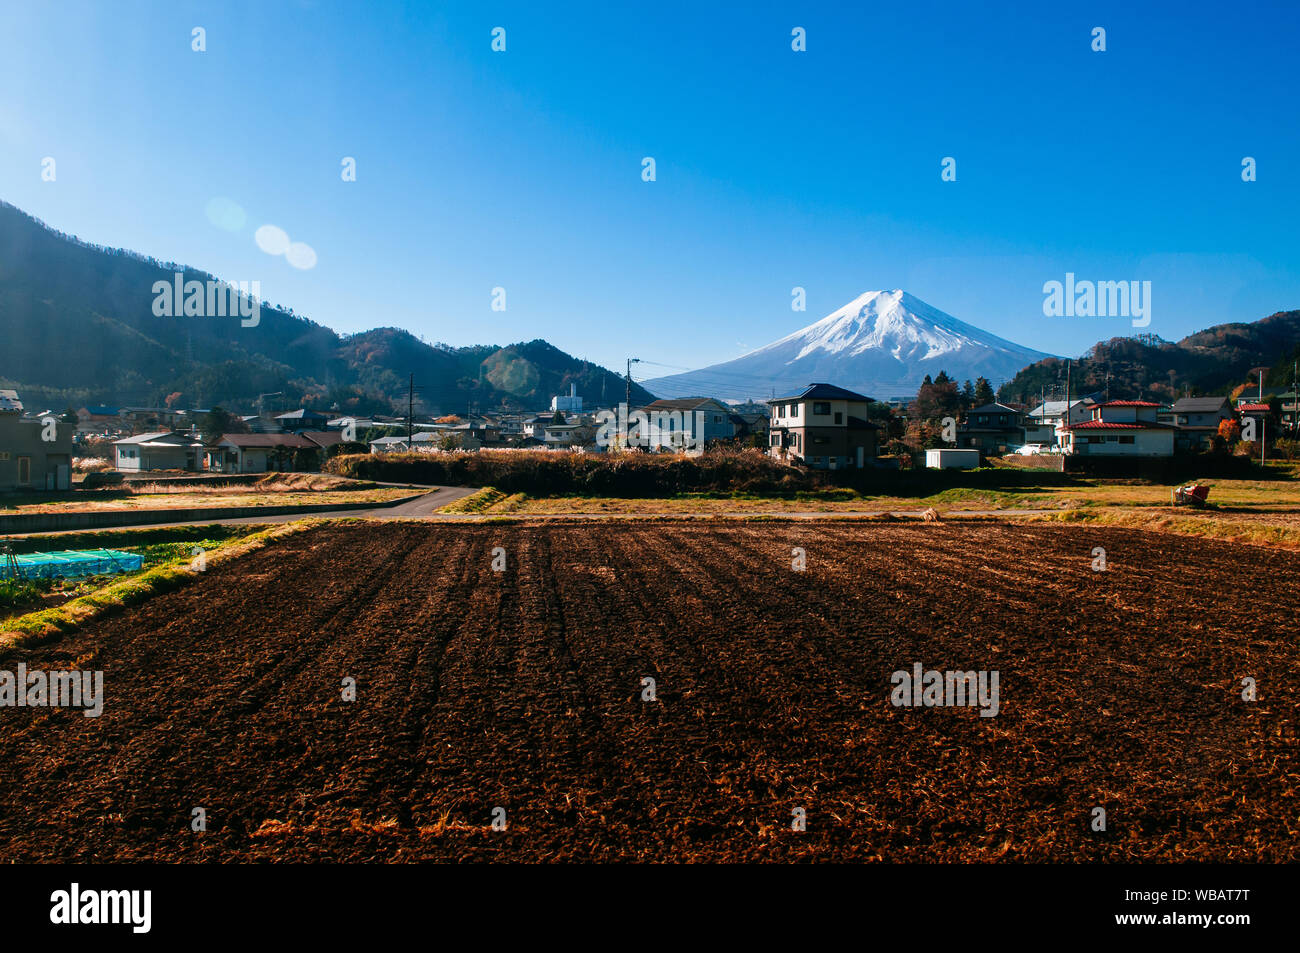 Snow covered Mount Fuji and local town along train route from Tokyo to Kawaguchiko seen through train window with some mirror reflect on left side Stock Photo